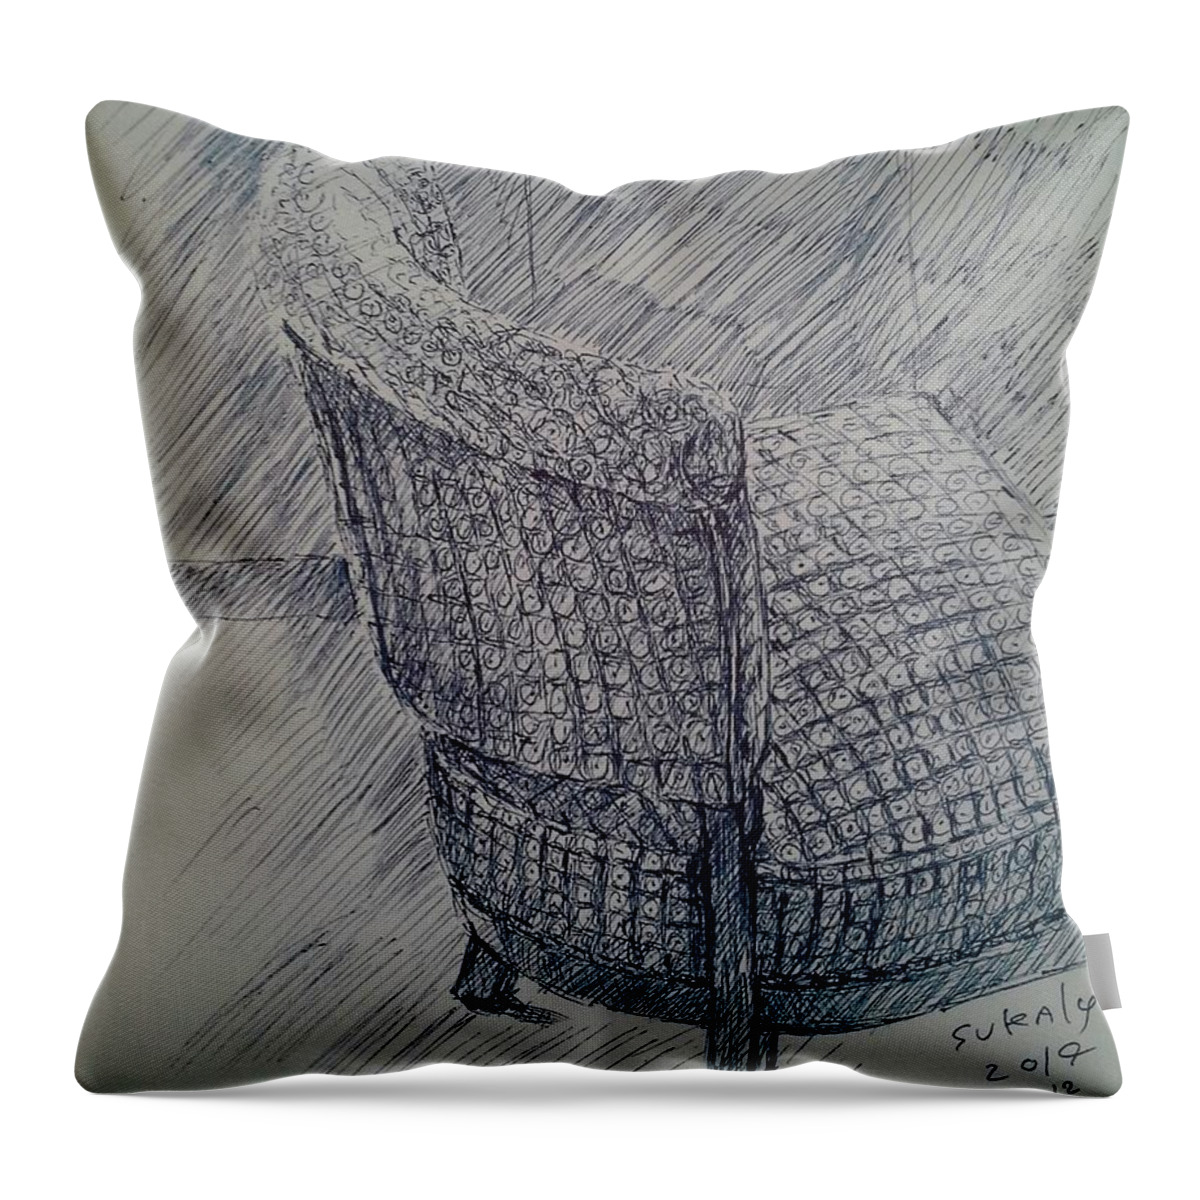 Starbucks Throw Pillow featuring the drawing A chair in Starbucks by Sukalya Chearanantana